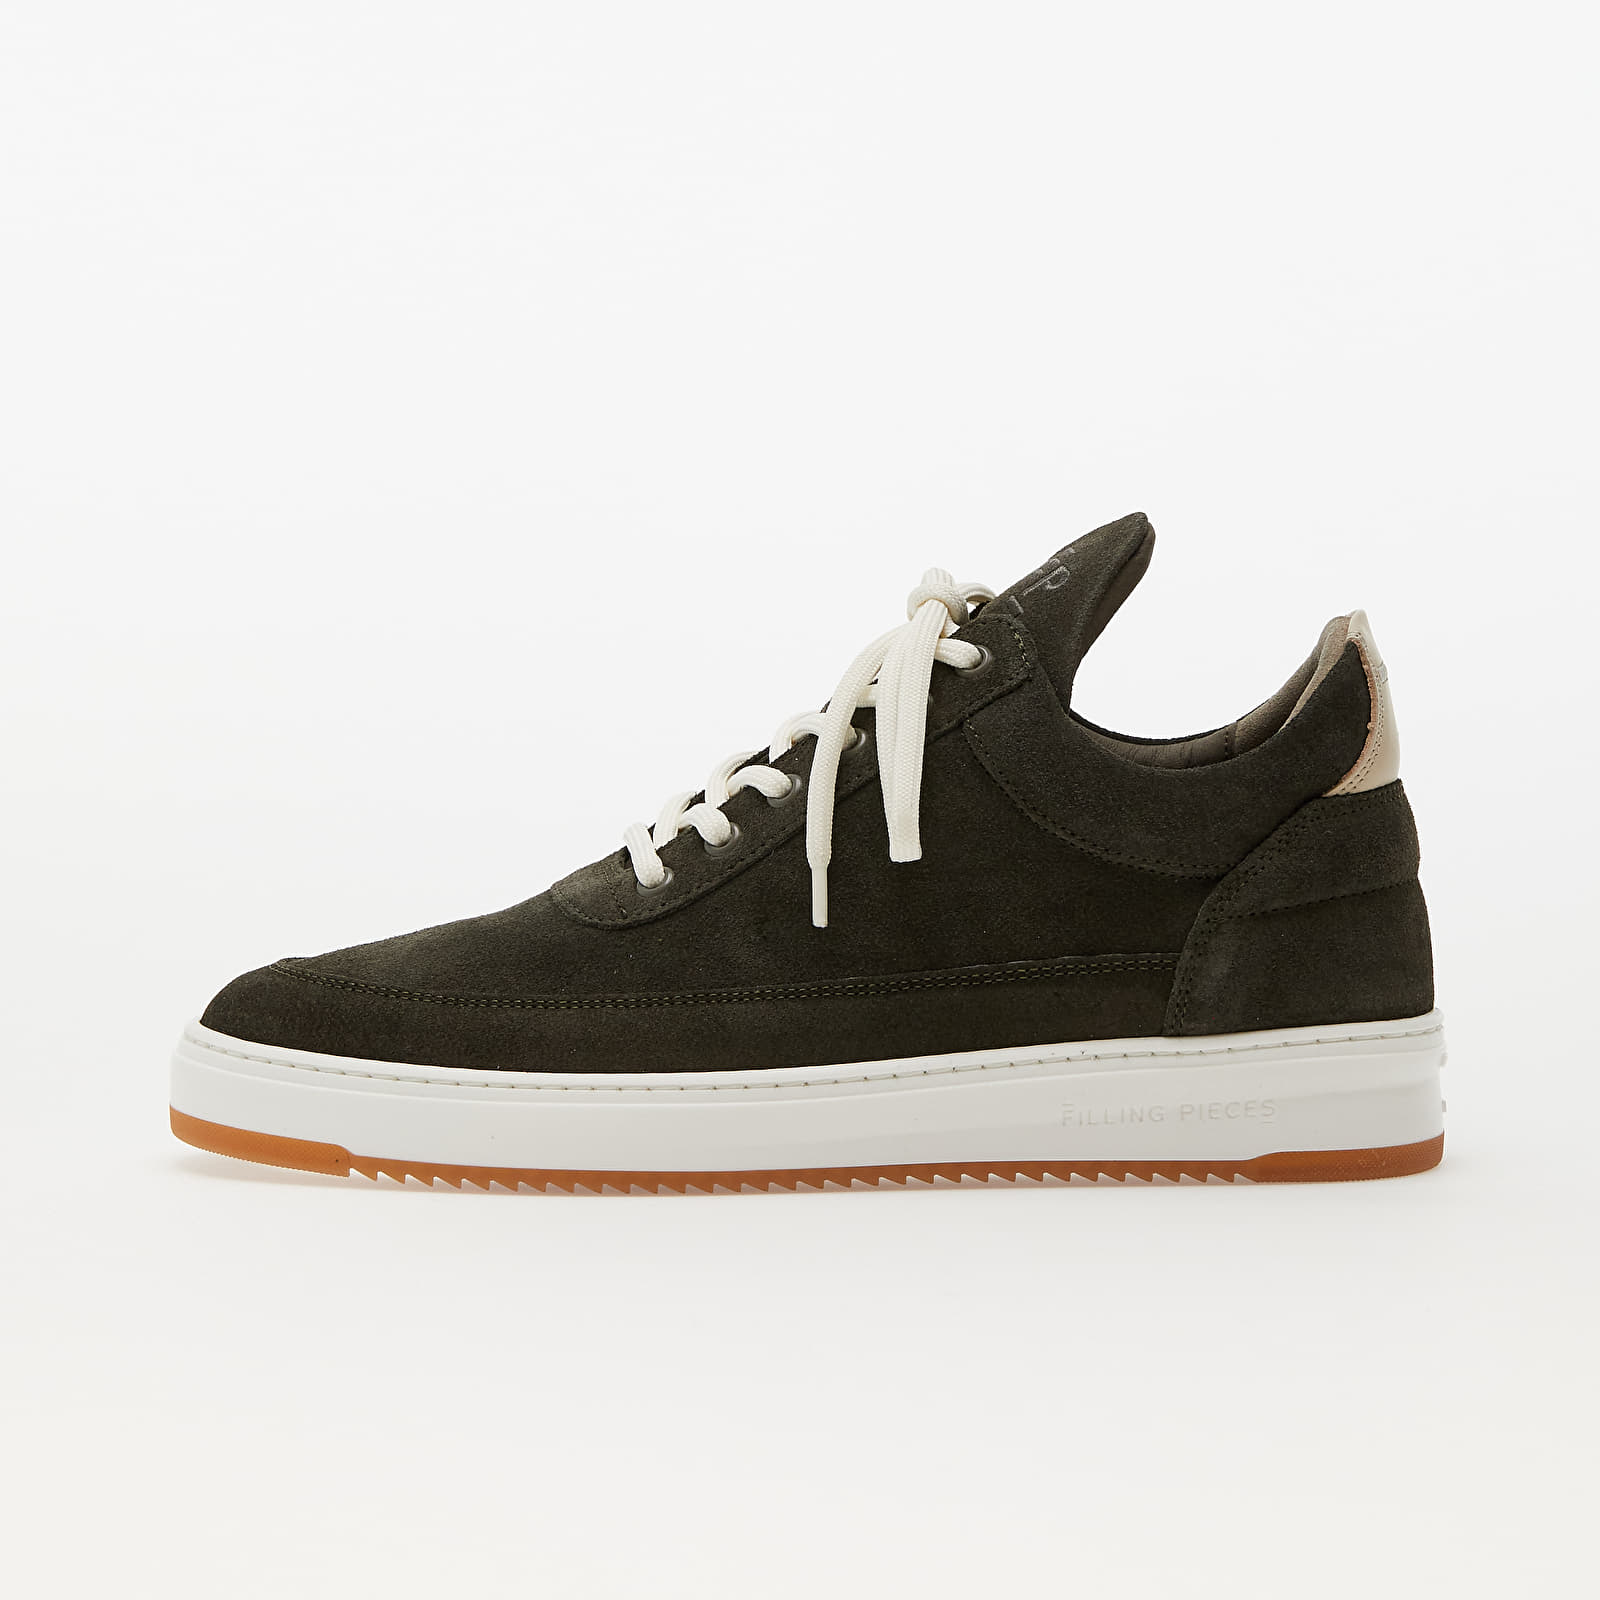 Pánske tenisky a topánky Filling Pieces Low Top Ripple Suede Green